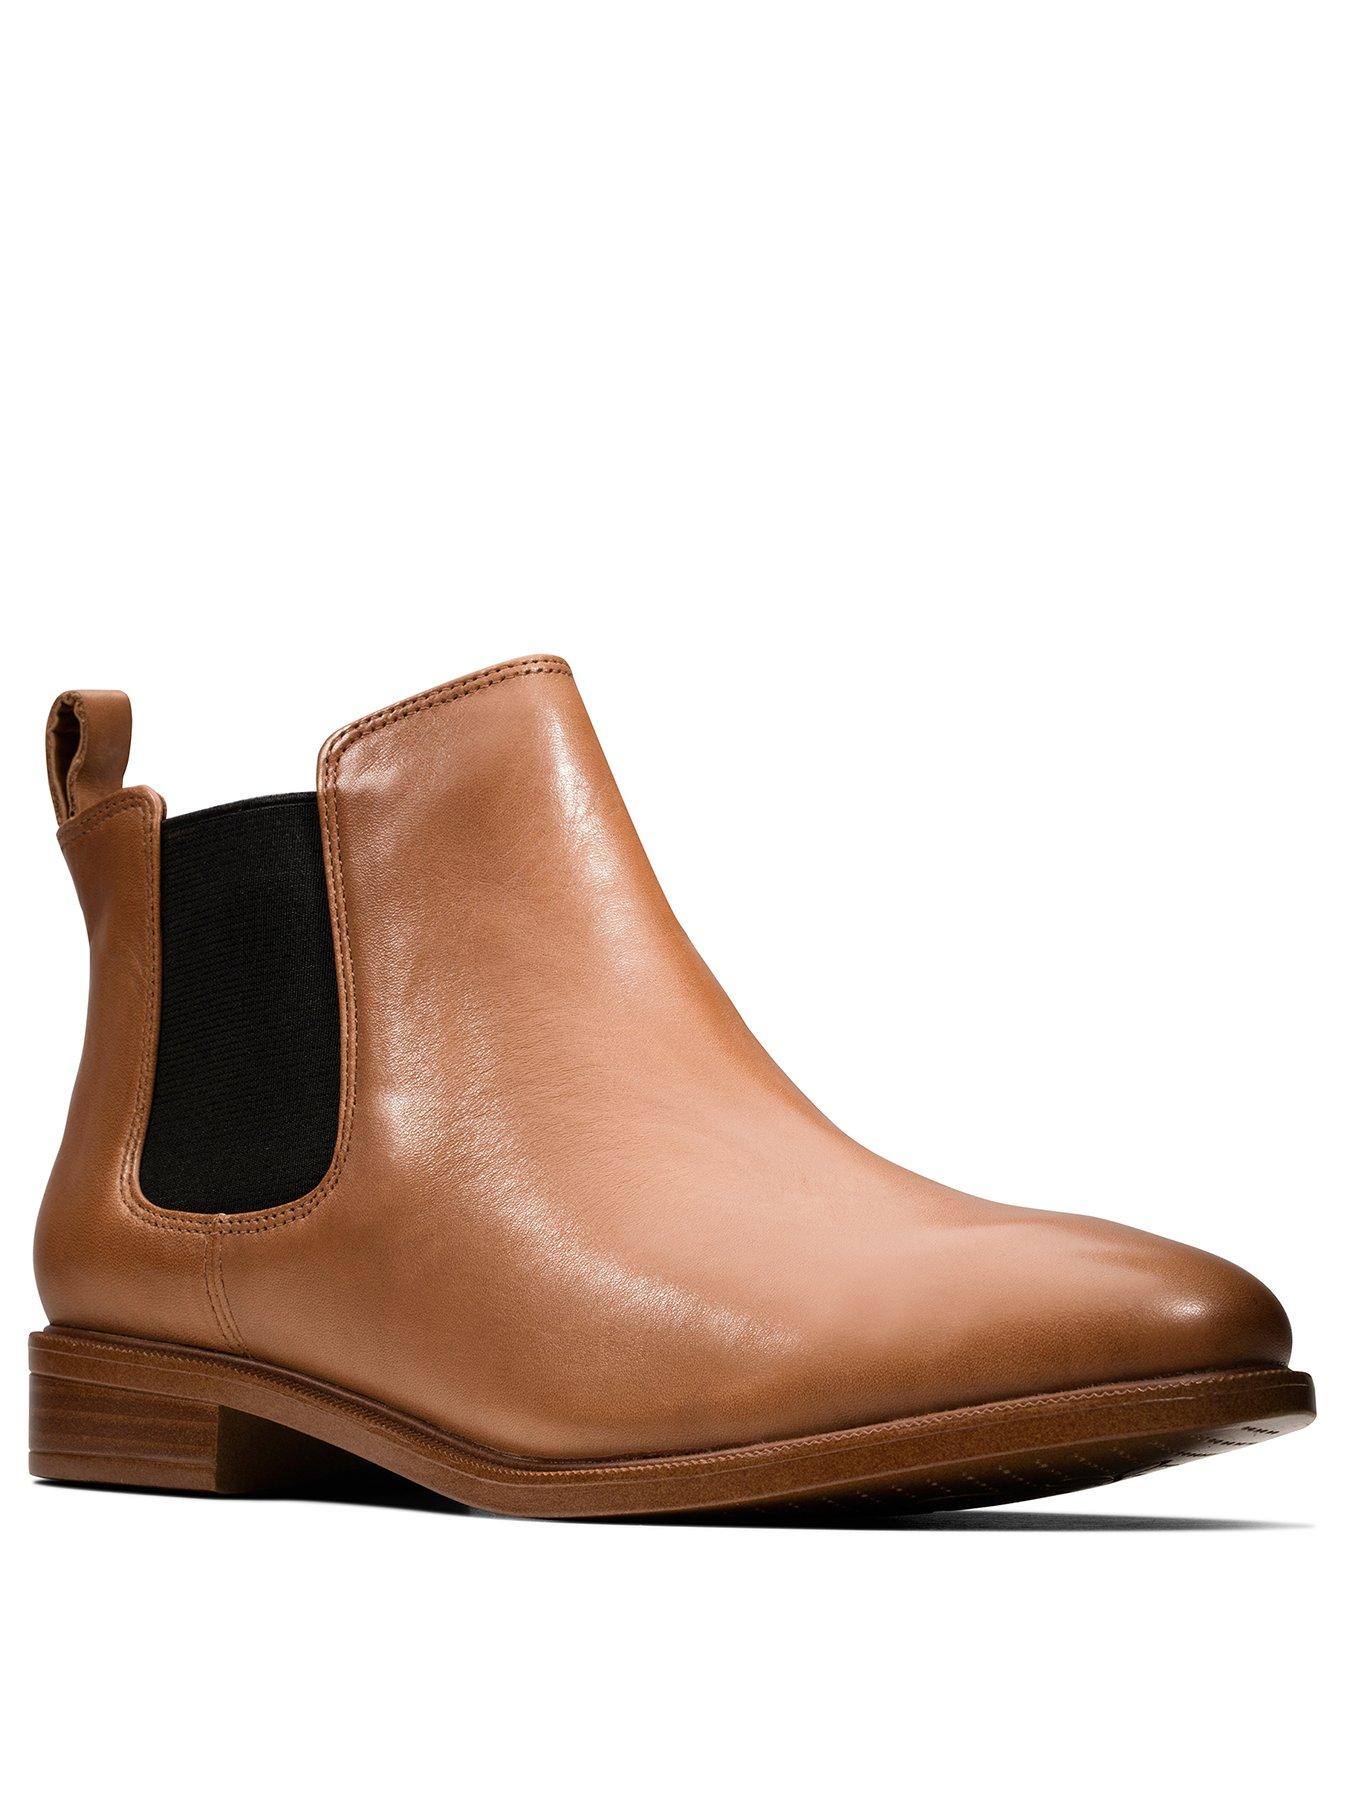 clarks wide boots